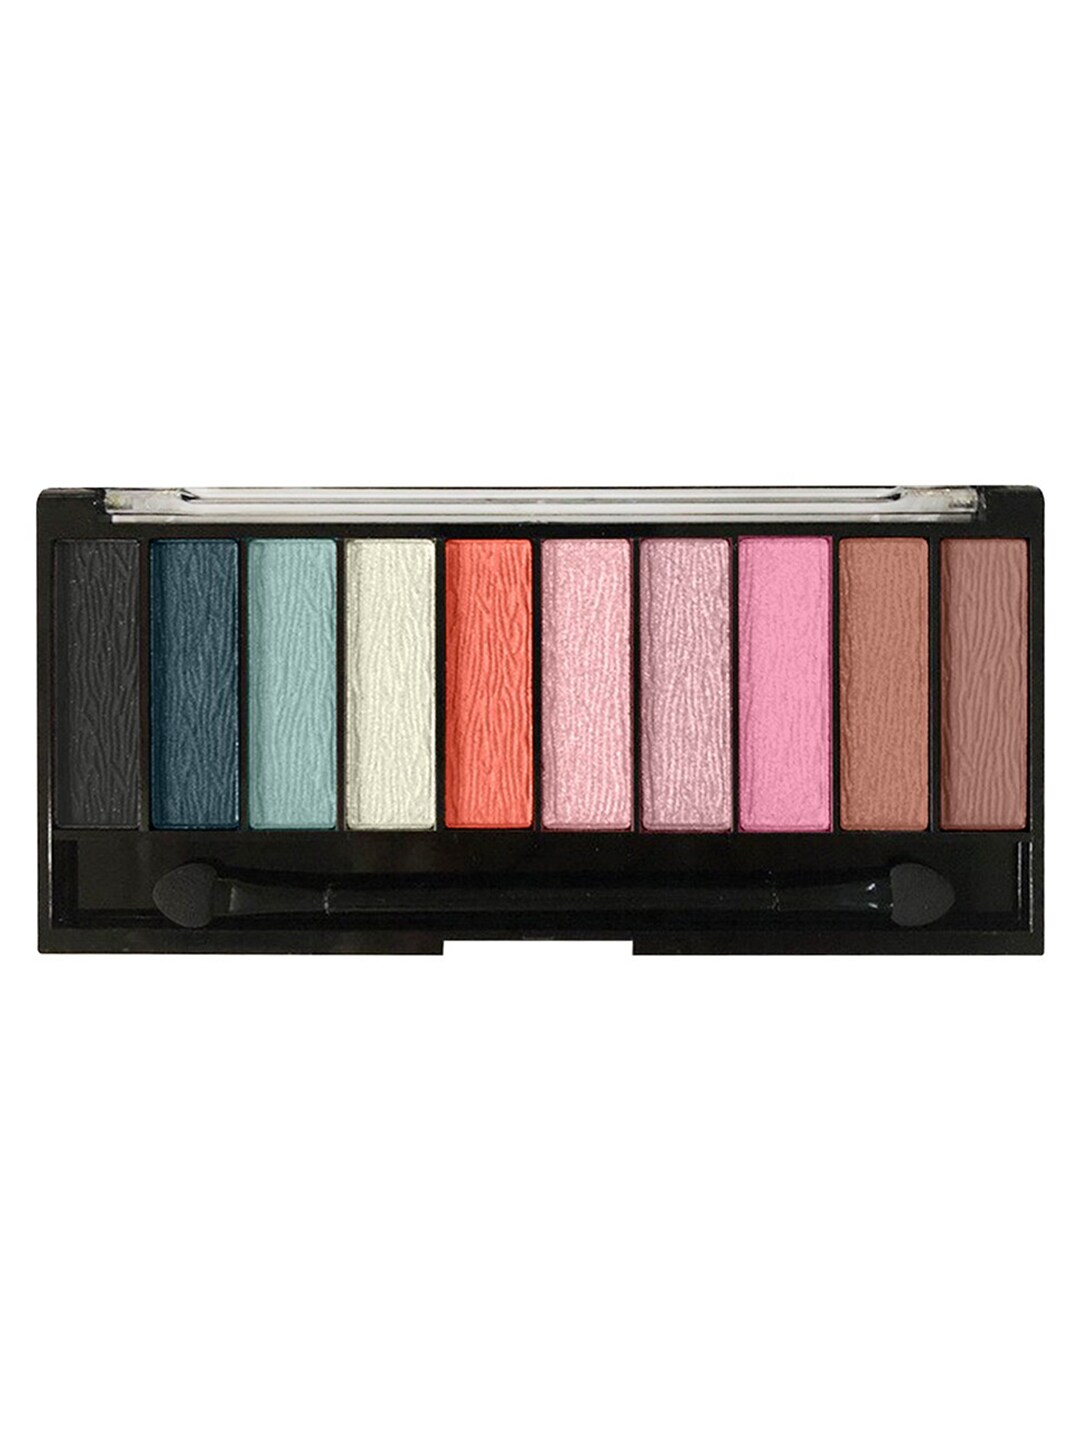 Sivanna Colors Pro Eyeshadow Palette - HF537 04 Price in India